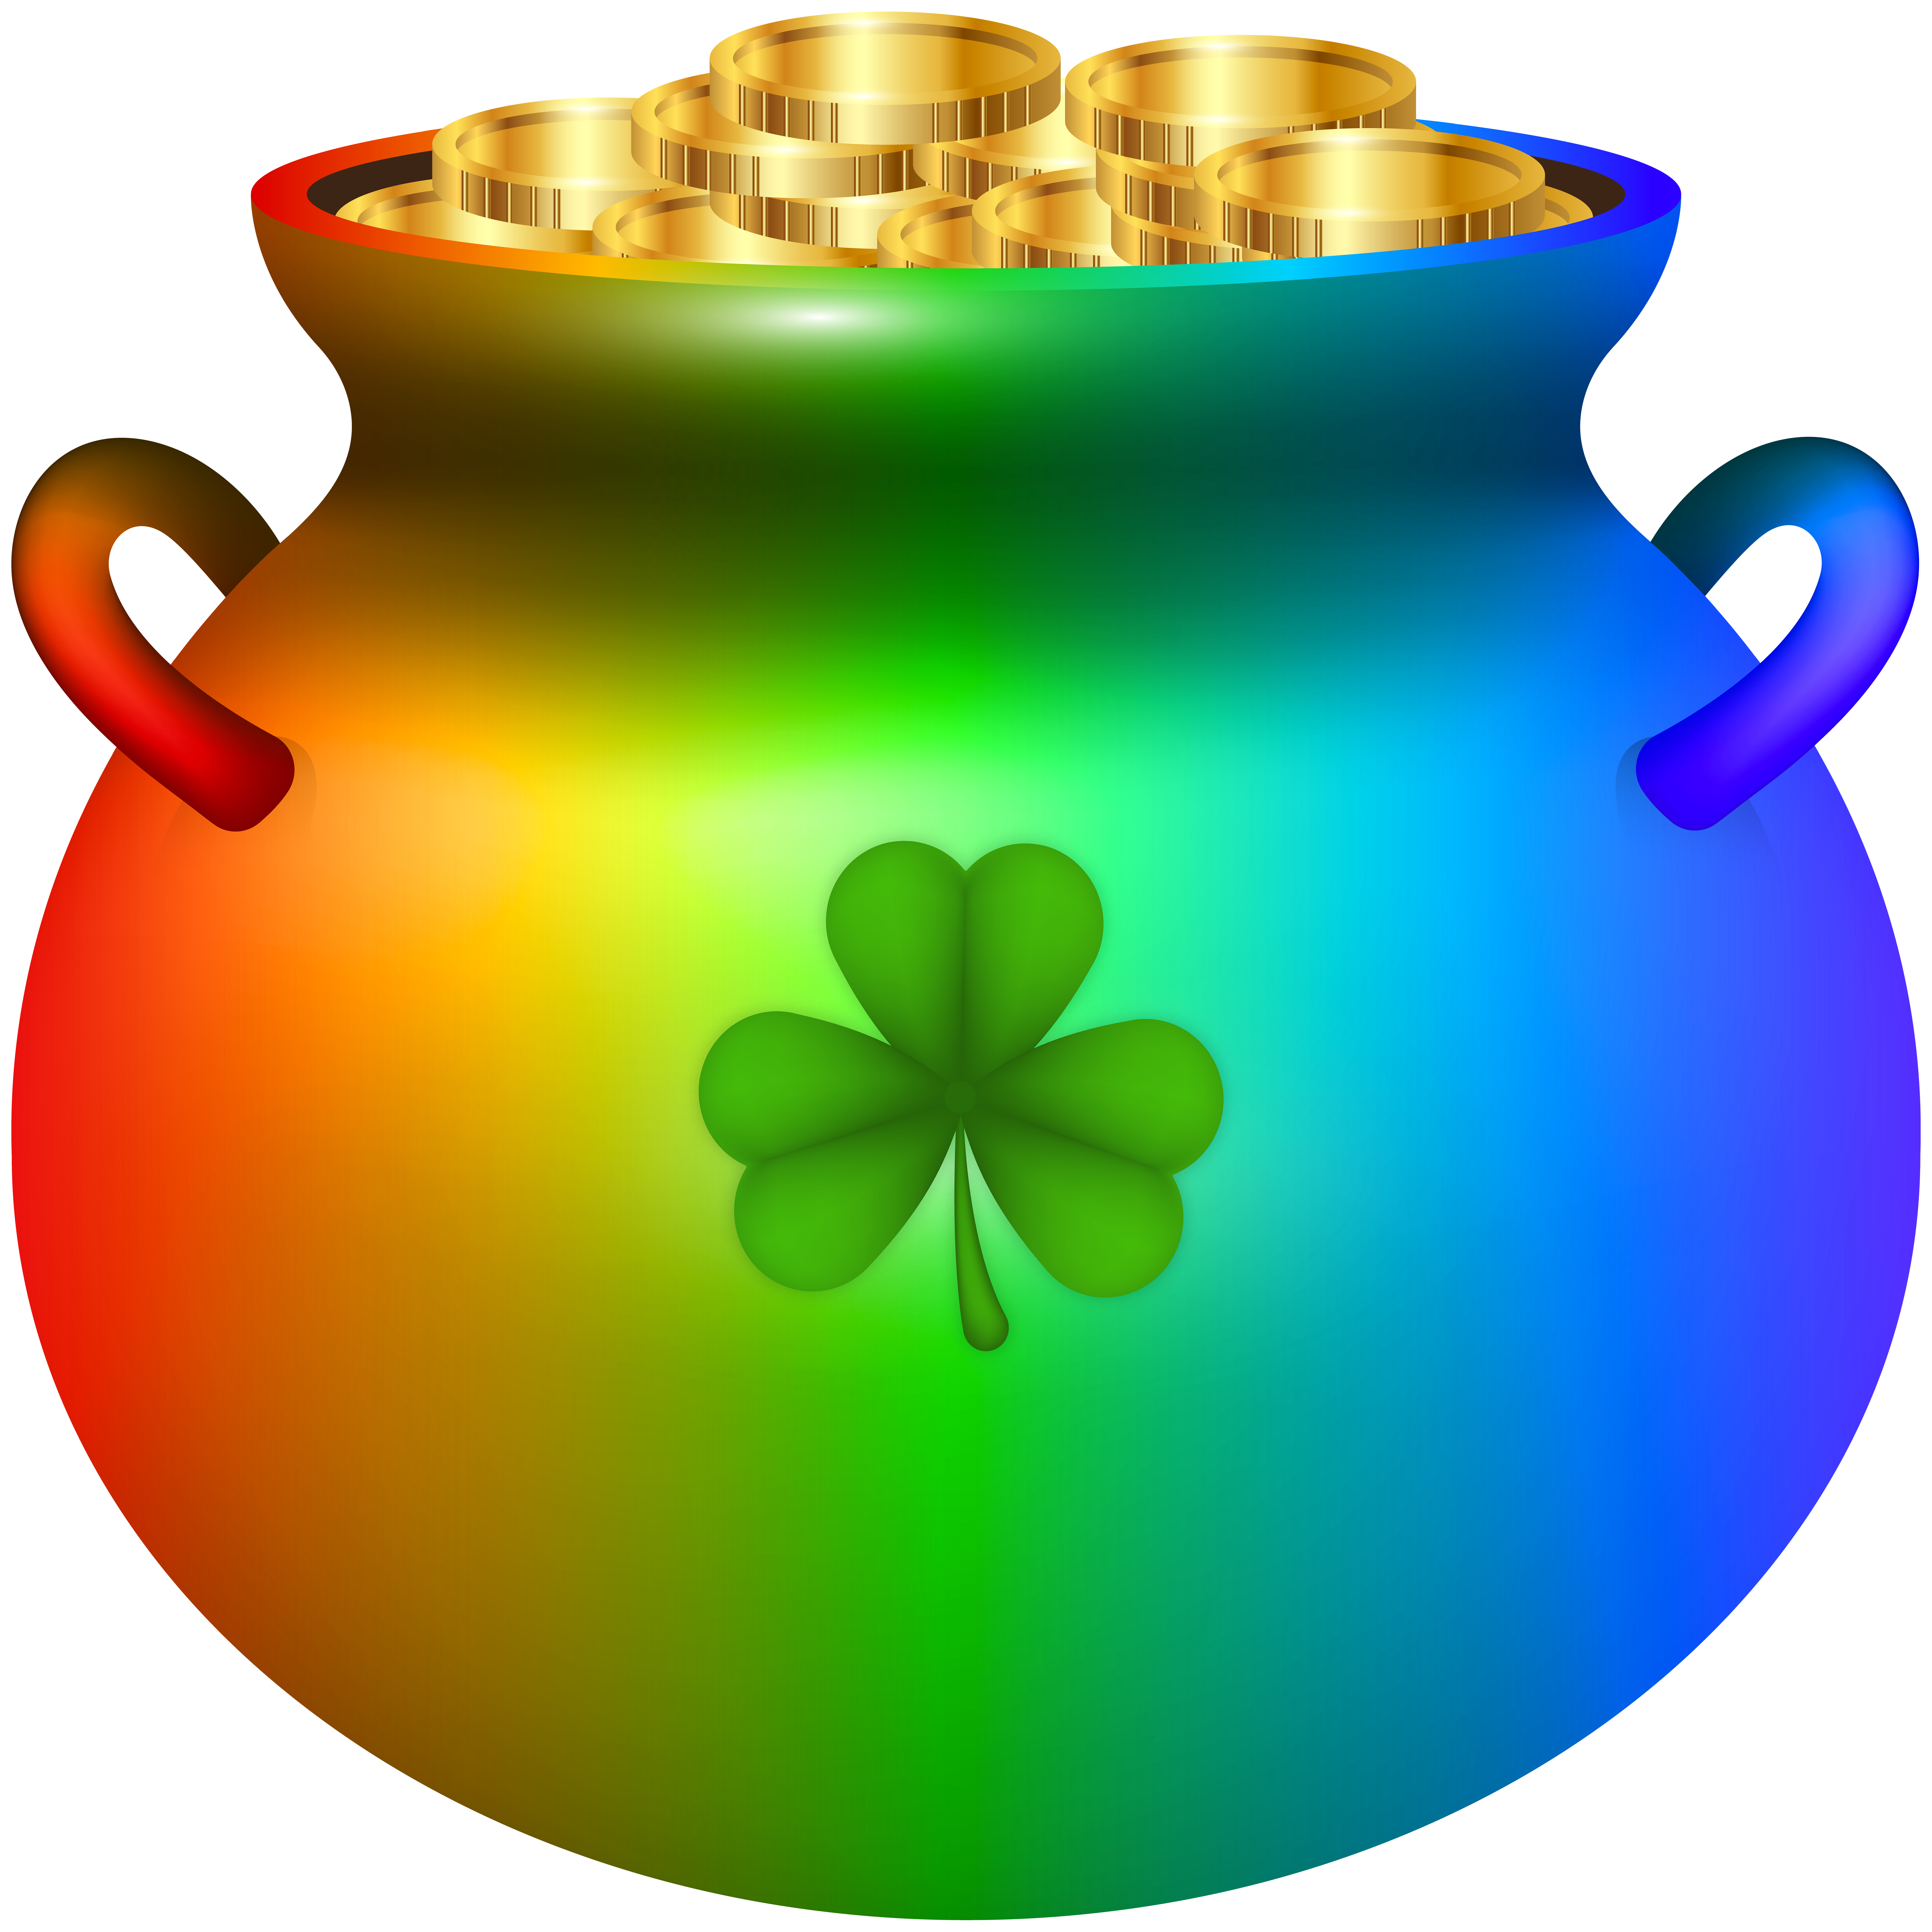 Pot of Gold Wallpaper Free Pot of Gold Background